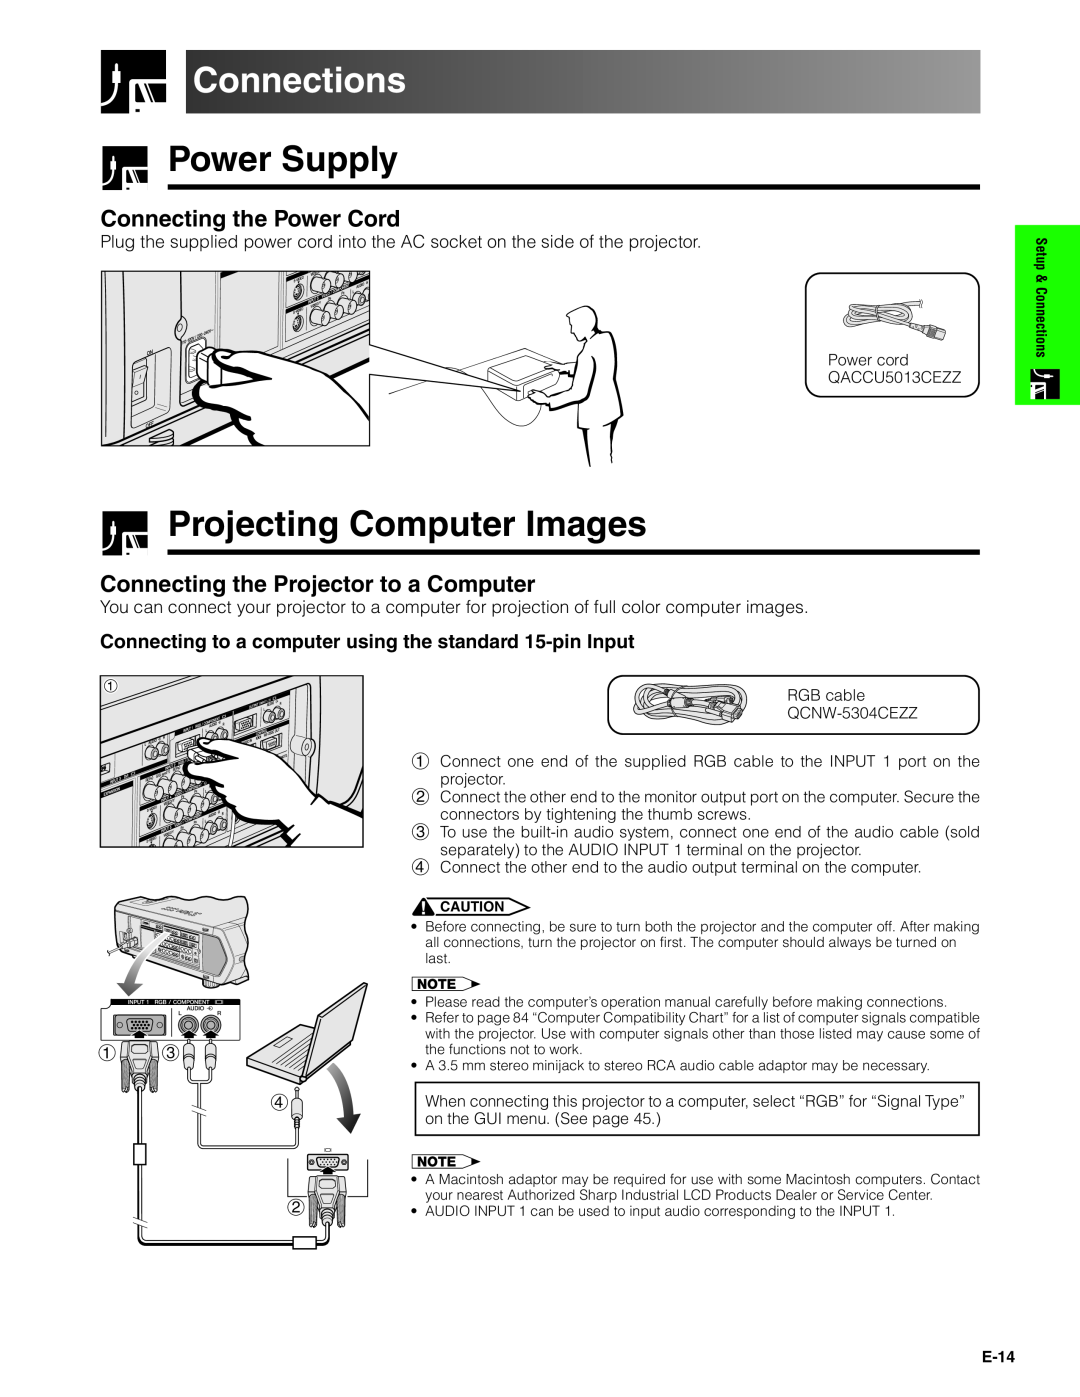 Sharp XG-V10XU operation manual Connections, Power Supply, Projecting Computer Images, Connecting the Power Cord 